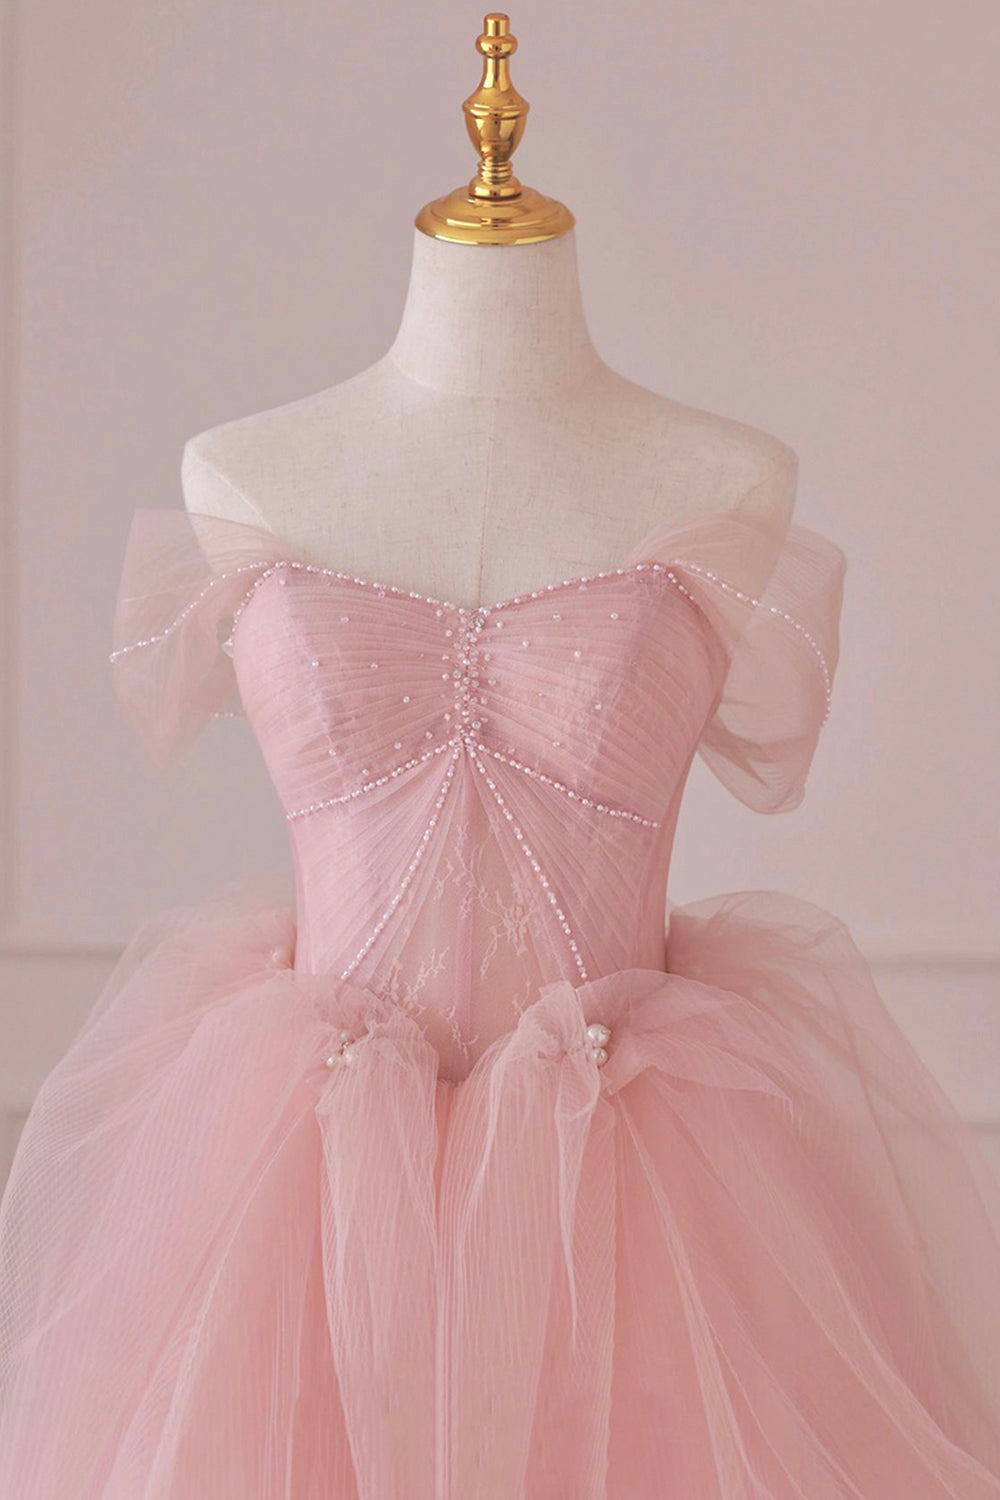 Ruffle Dress, Pink Tulle Lace Long Formal Dress, A-Line Off Shoulder Pink Prom Dress